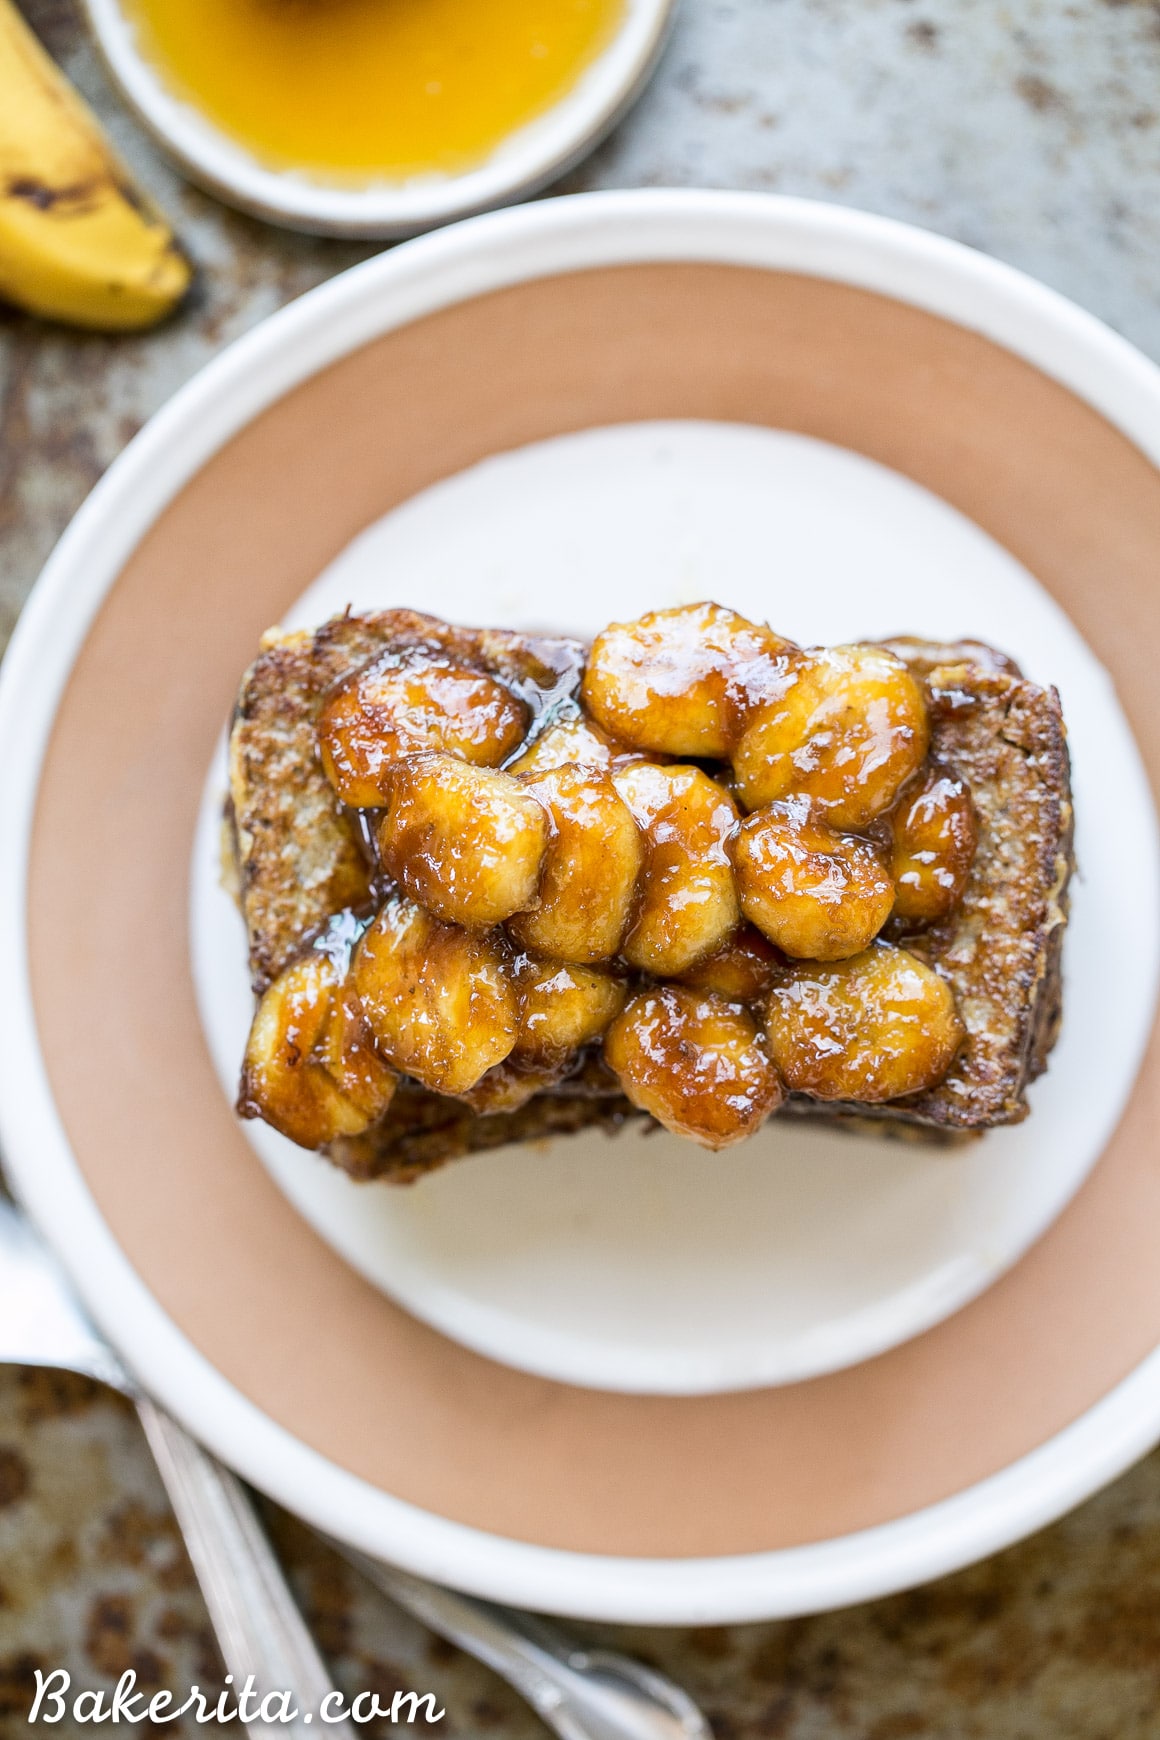 This Banana Bread French Toast is topped with caramelized bananas for a banana lover's delight! This gluten-free, Paleo, and dairy-free french toast is sure to satisfy your breakfast and brunch cravings.